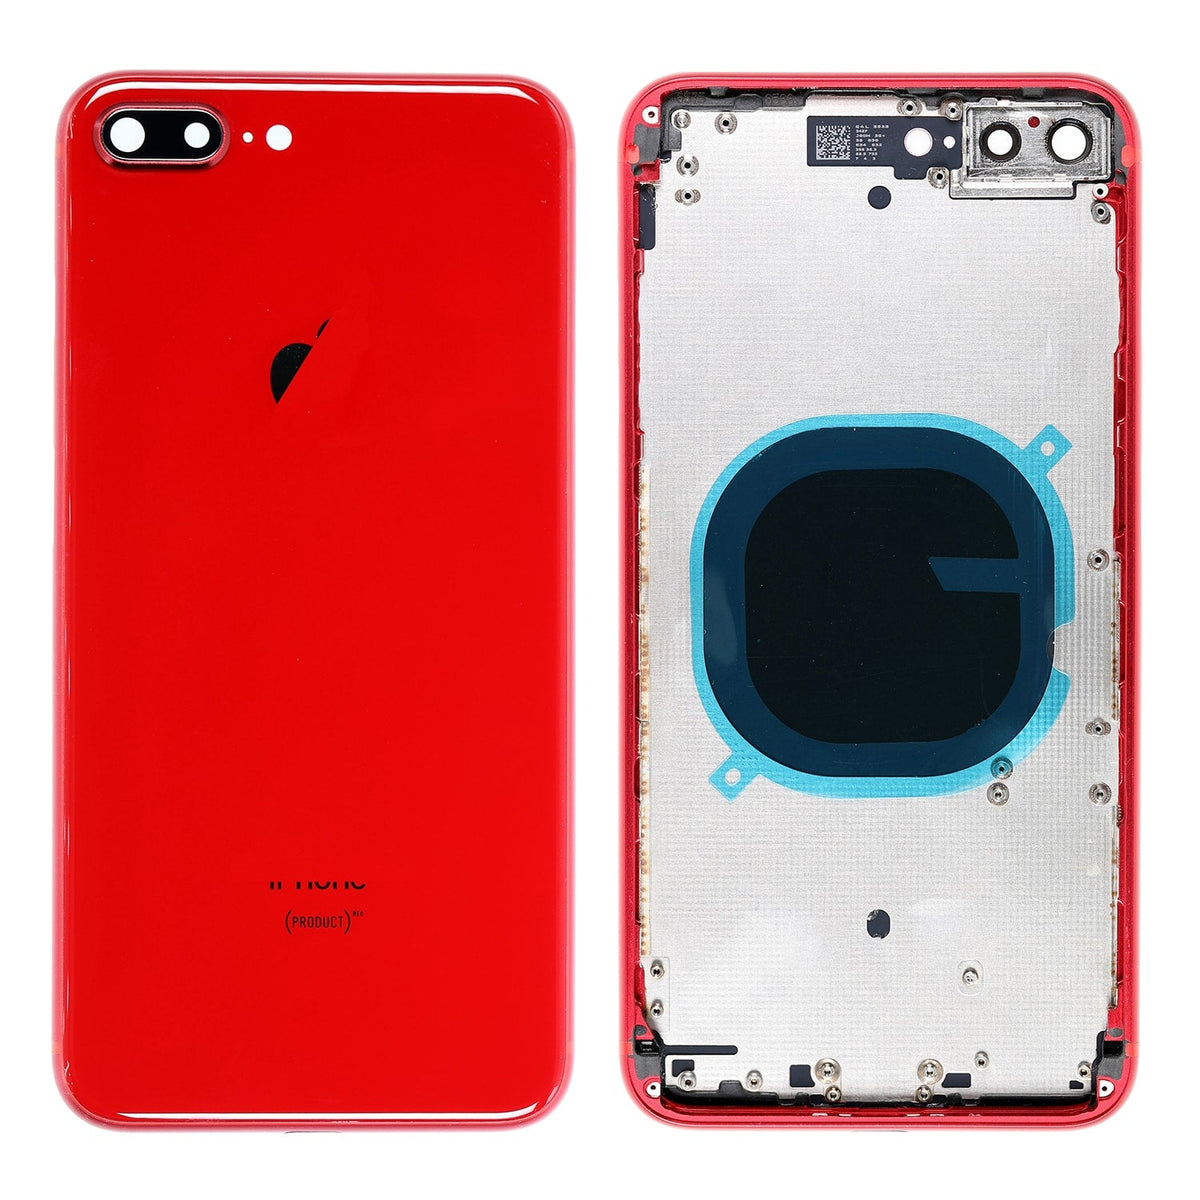 RED BACK COVER WITH FRAME ASSEMBLY FOR IPHONE 8 PLUS